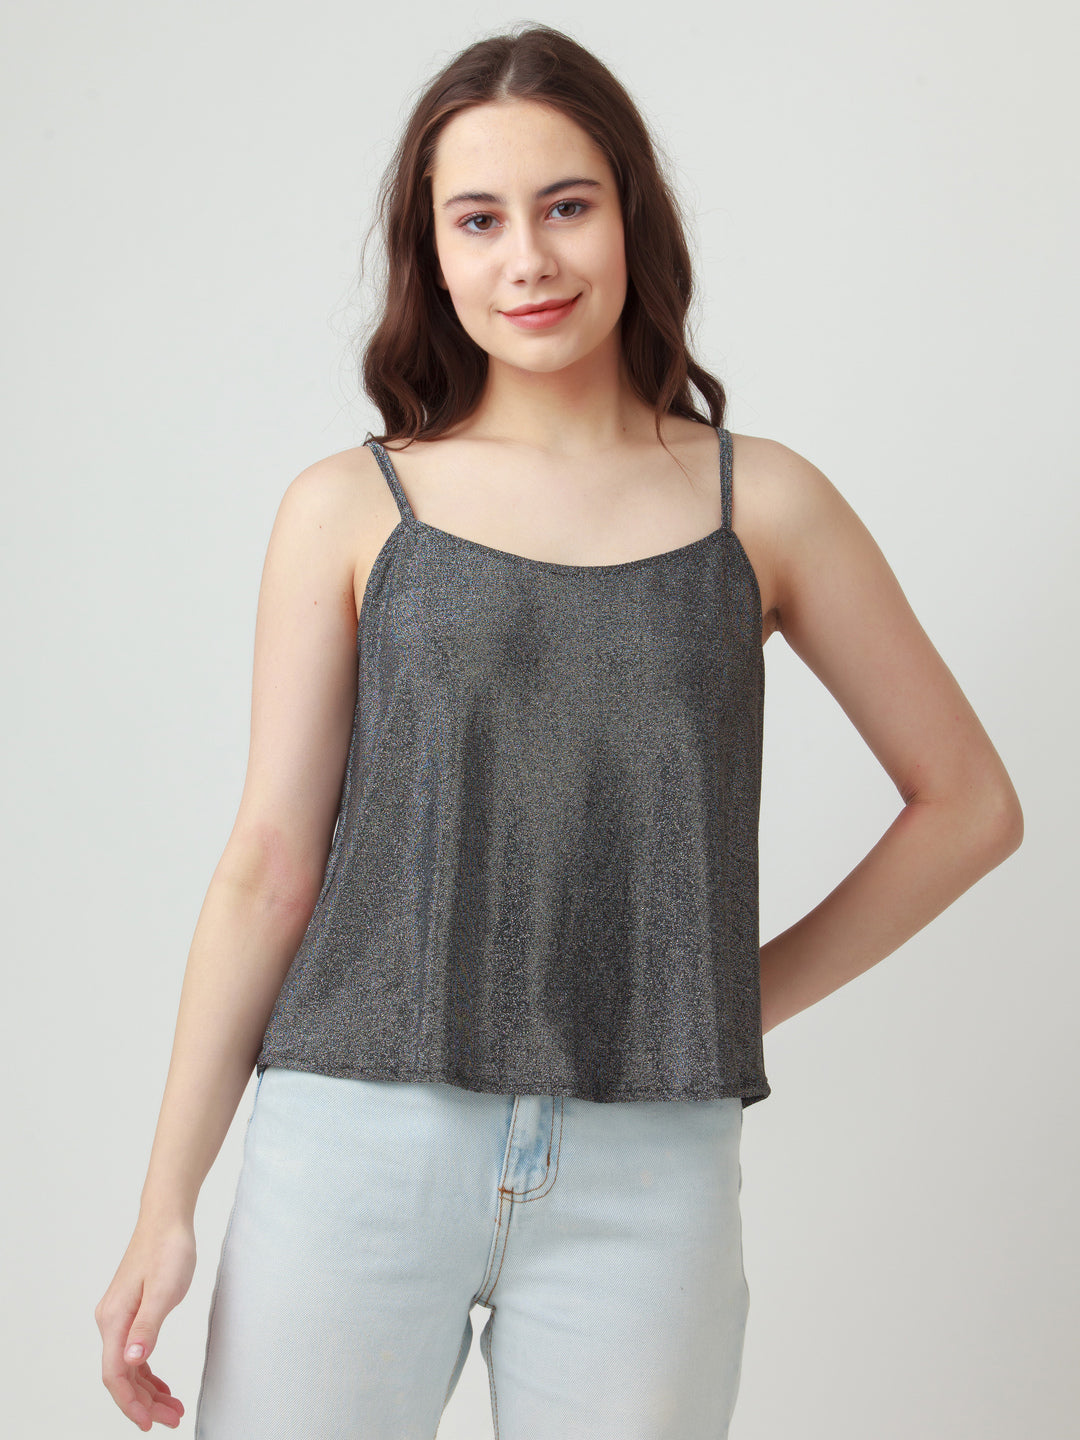 Silver Shimmer Top For Women